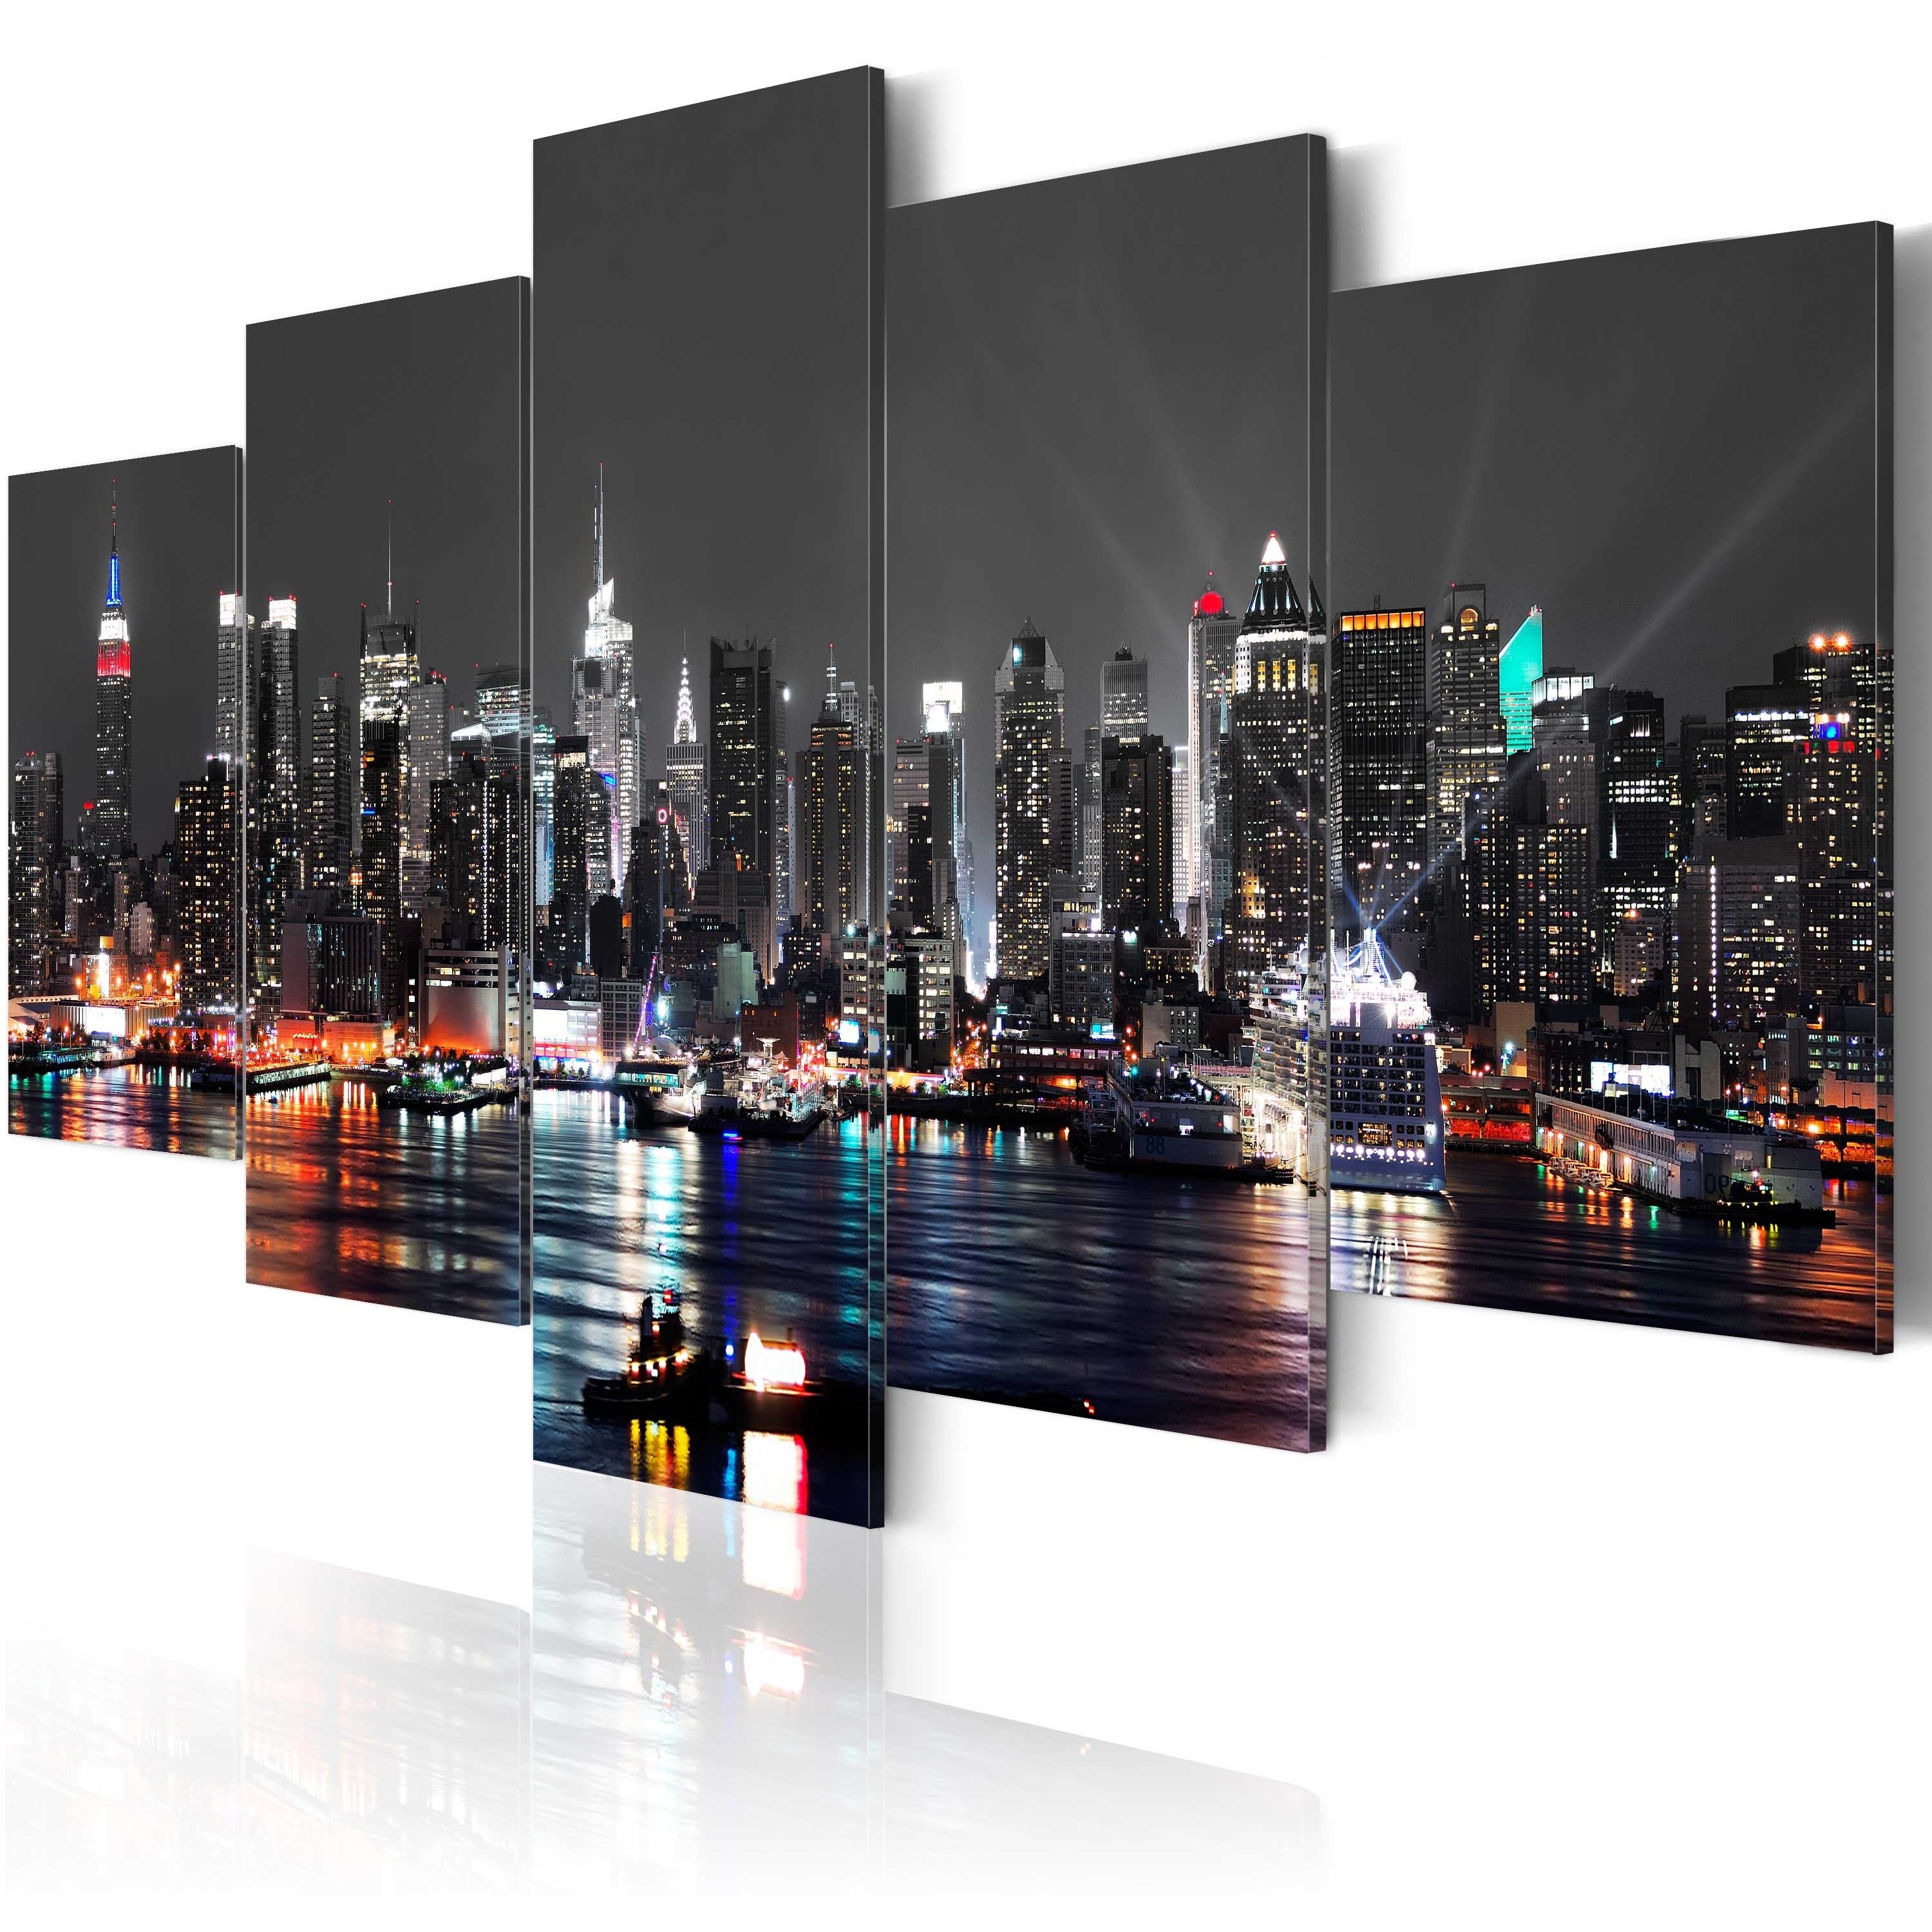 2017 Canvas Wall Art Of New York City Inside Large Canvas Wall Art Print + Image + Picture + Photo New York D A (View 4 of 15)